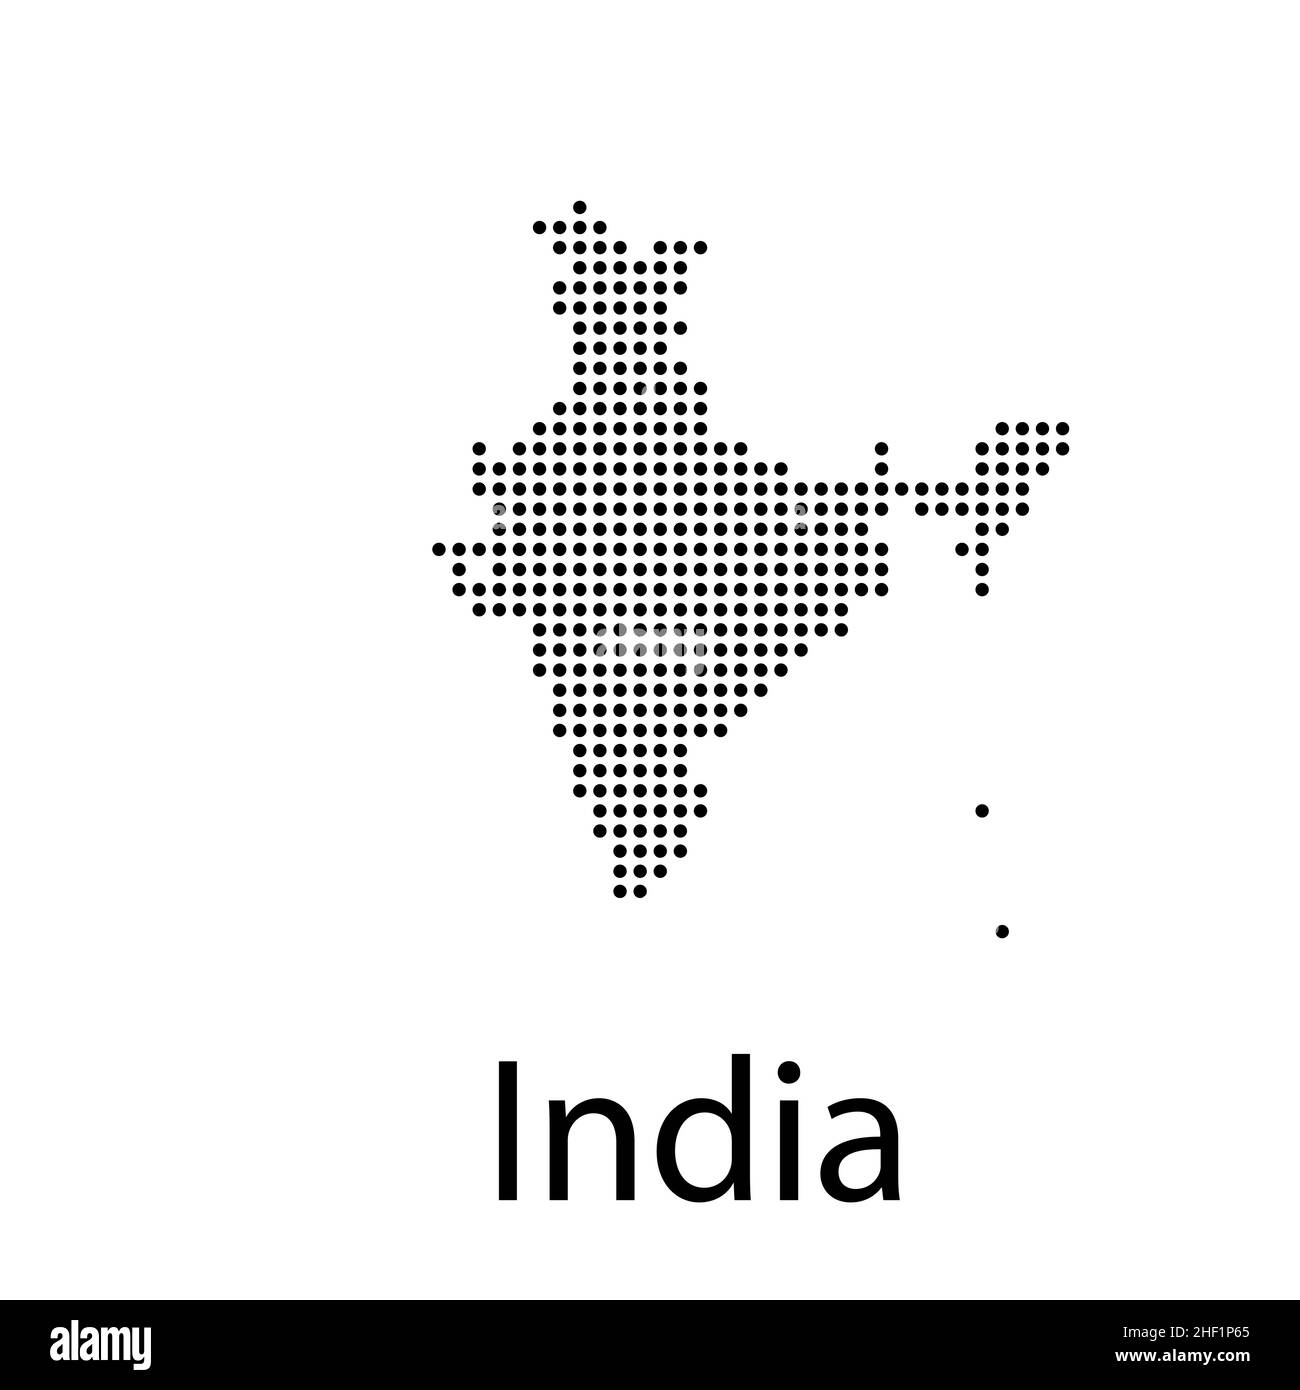 Black India map separated on states vector illustration Stock Vector